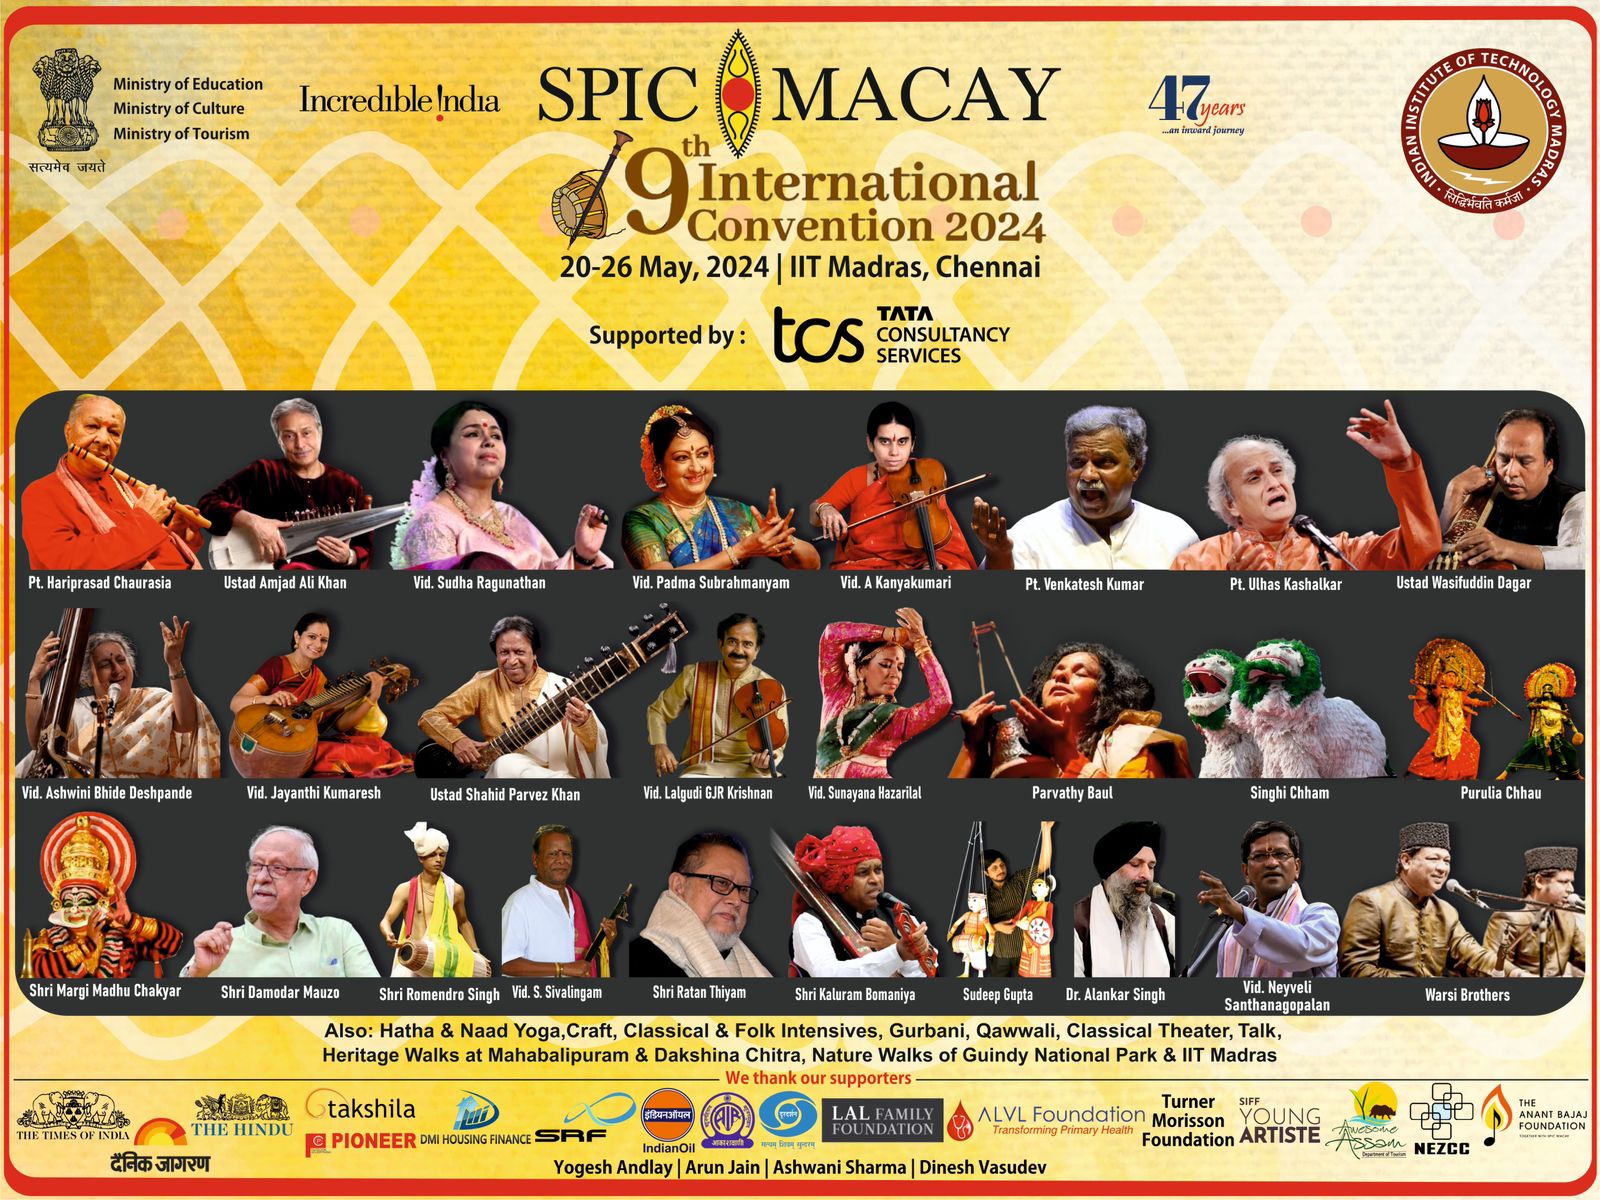 SPIC MACAY 9th International Convention 2024